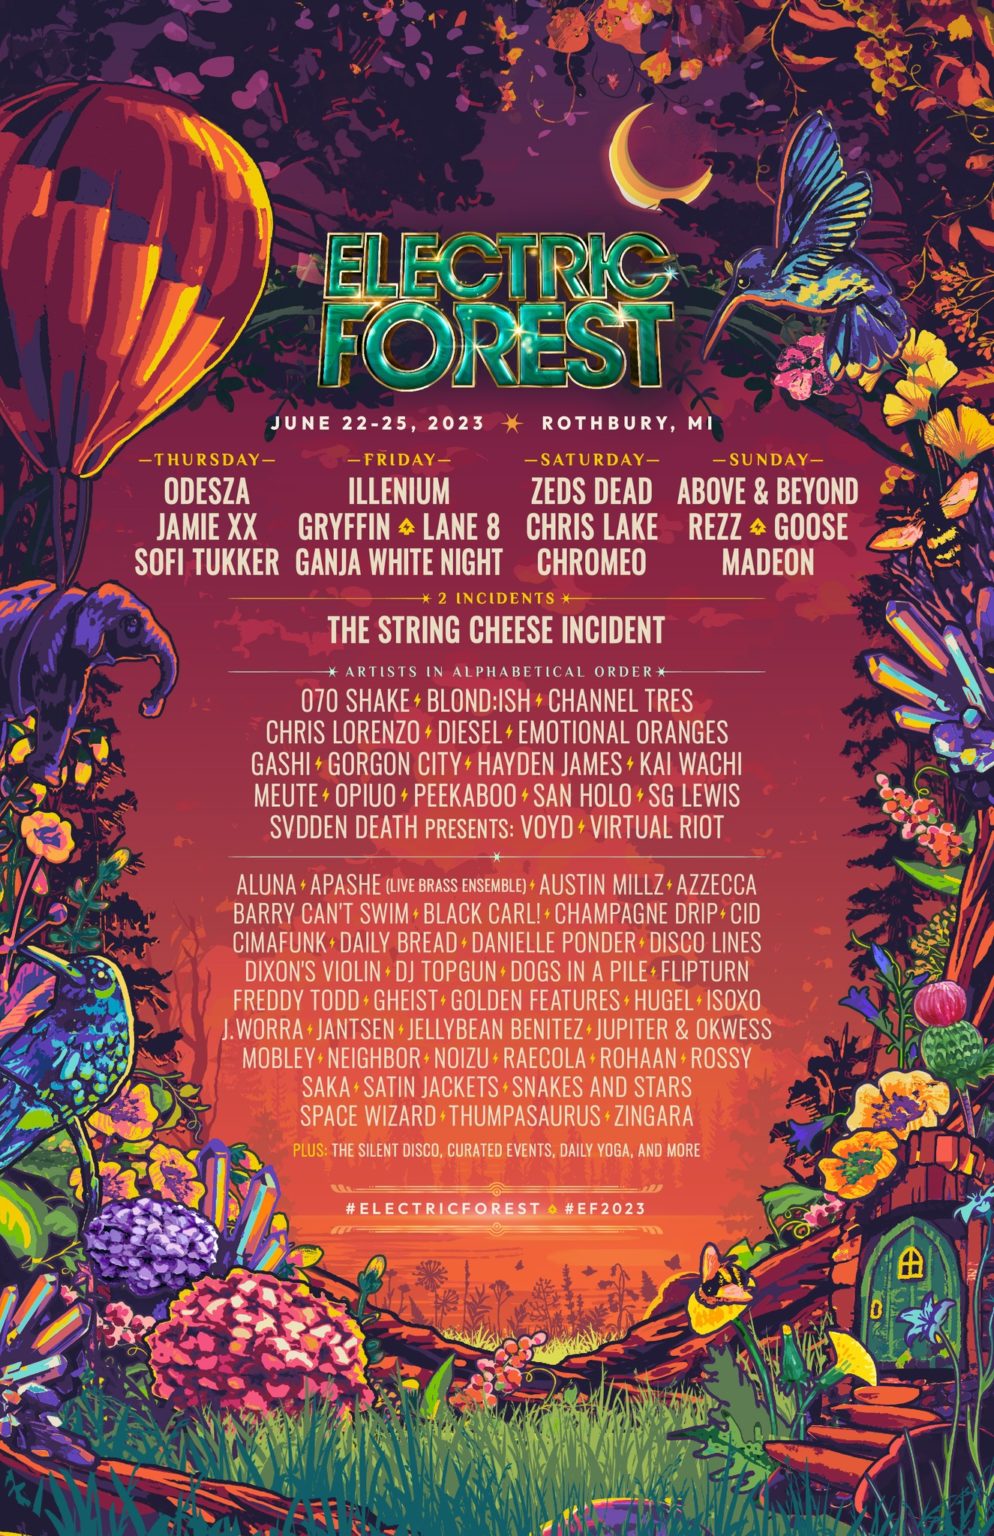 Electric Forest Releases 2023 Lineup ft. Odesza, Zeds Dead, REZZ, and More